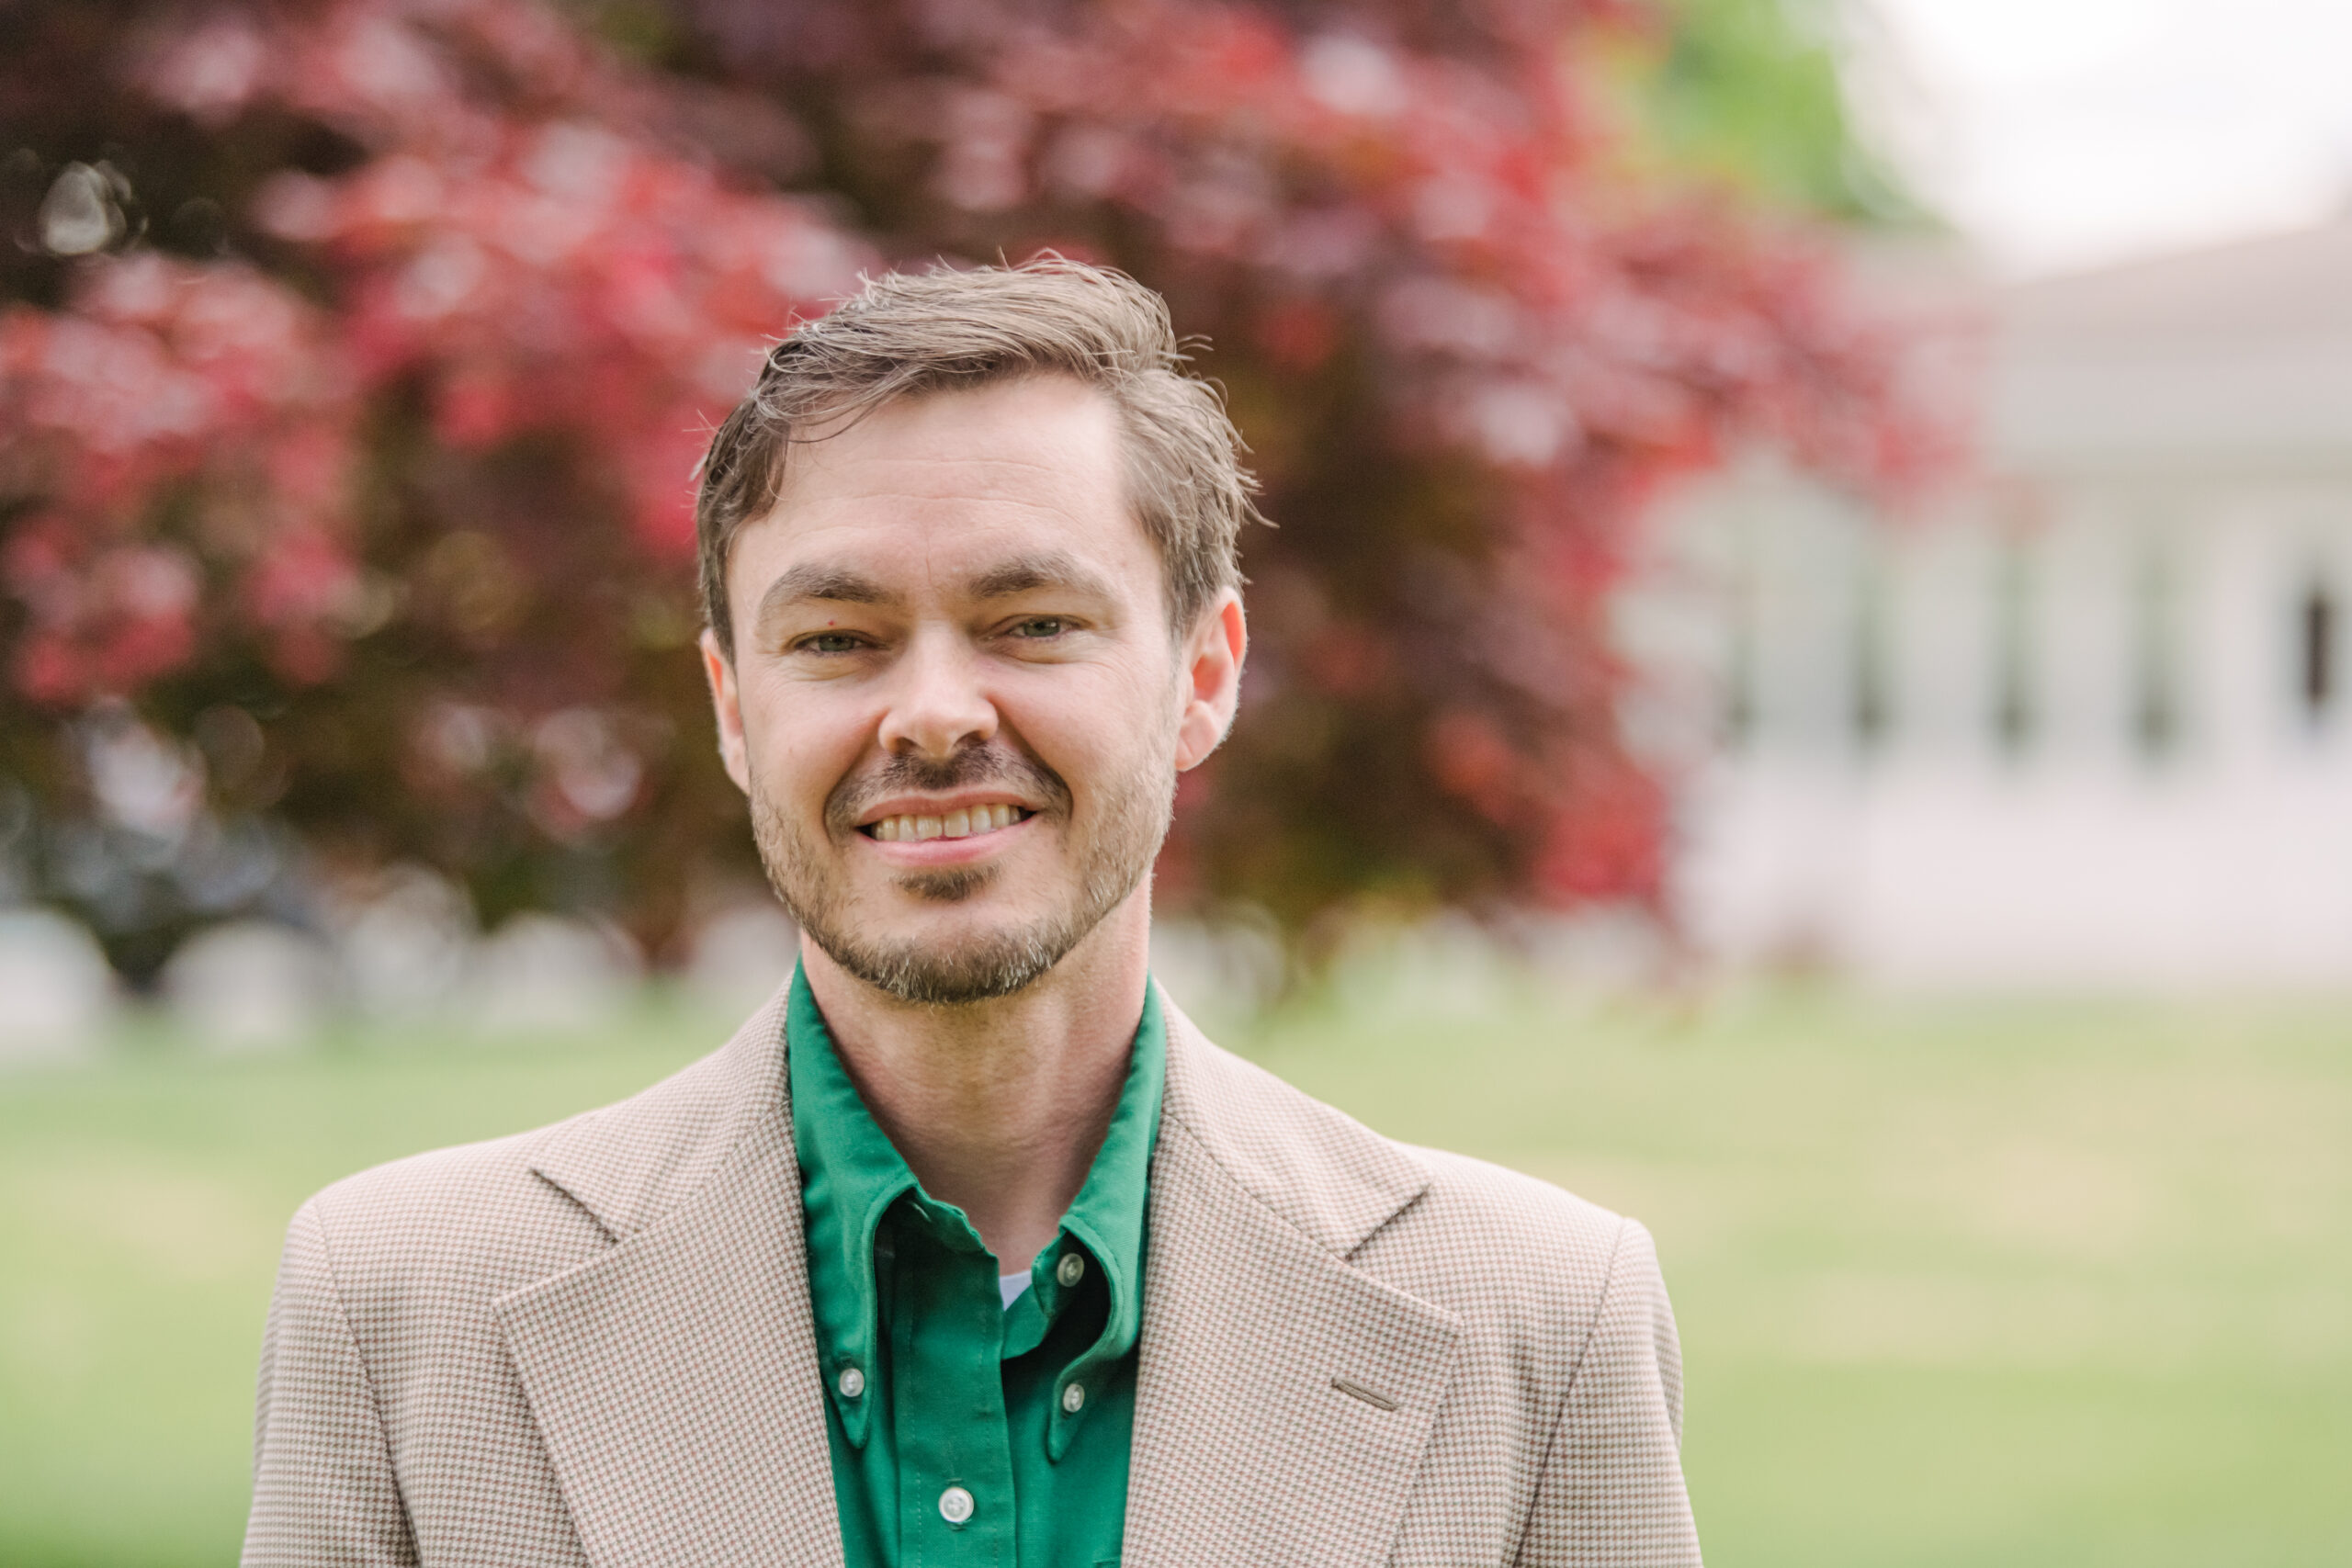 An adult with short brown hear wearing an emerald dress shirt and grey suit jacket stands outside in front of large pine trees. Academic Minute